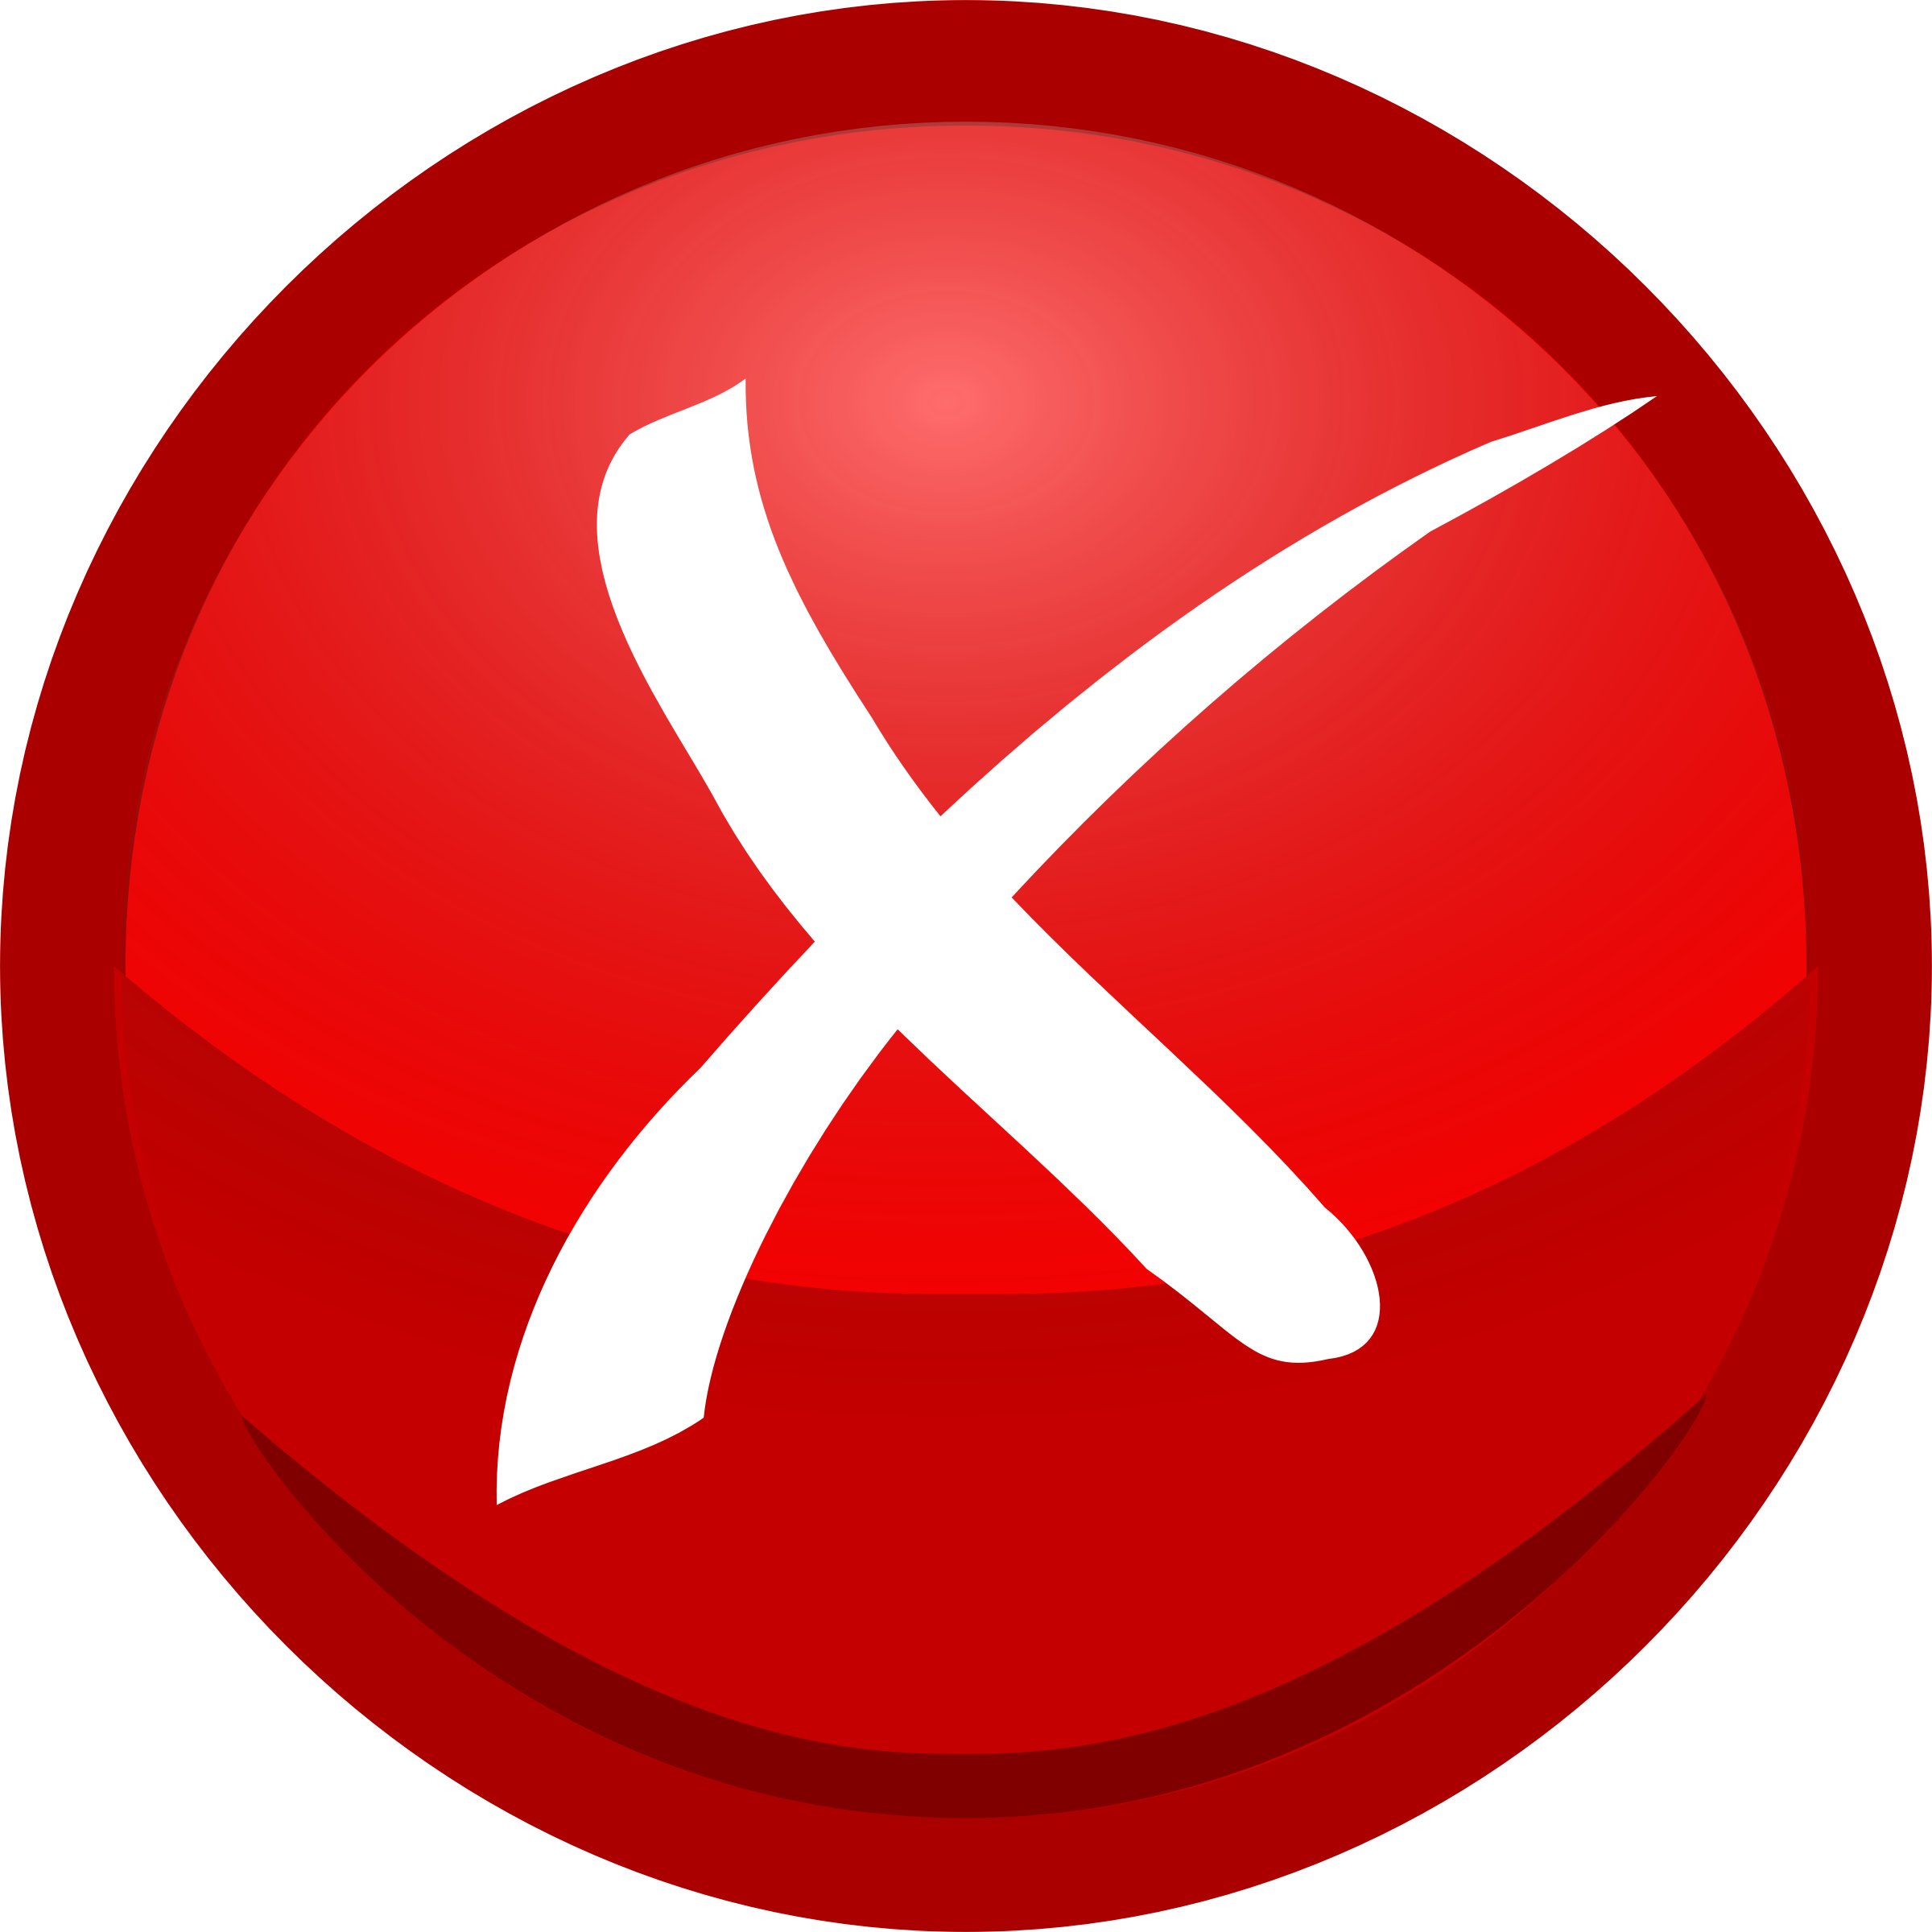 Red Cross Transparent PNG Image